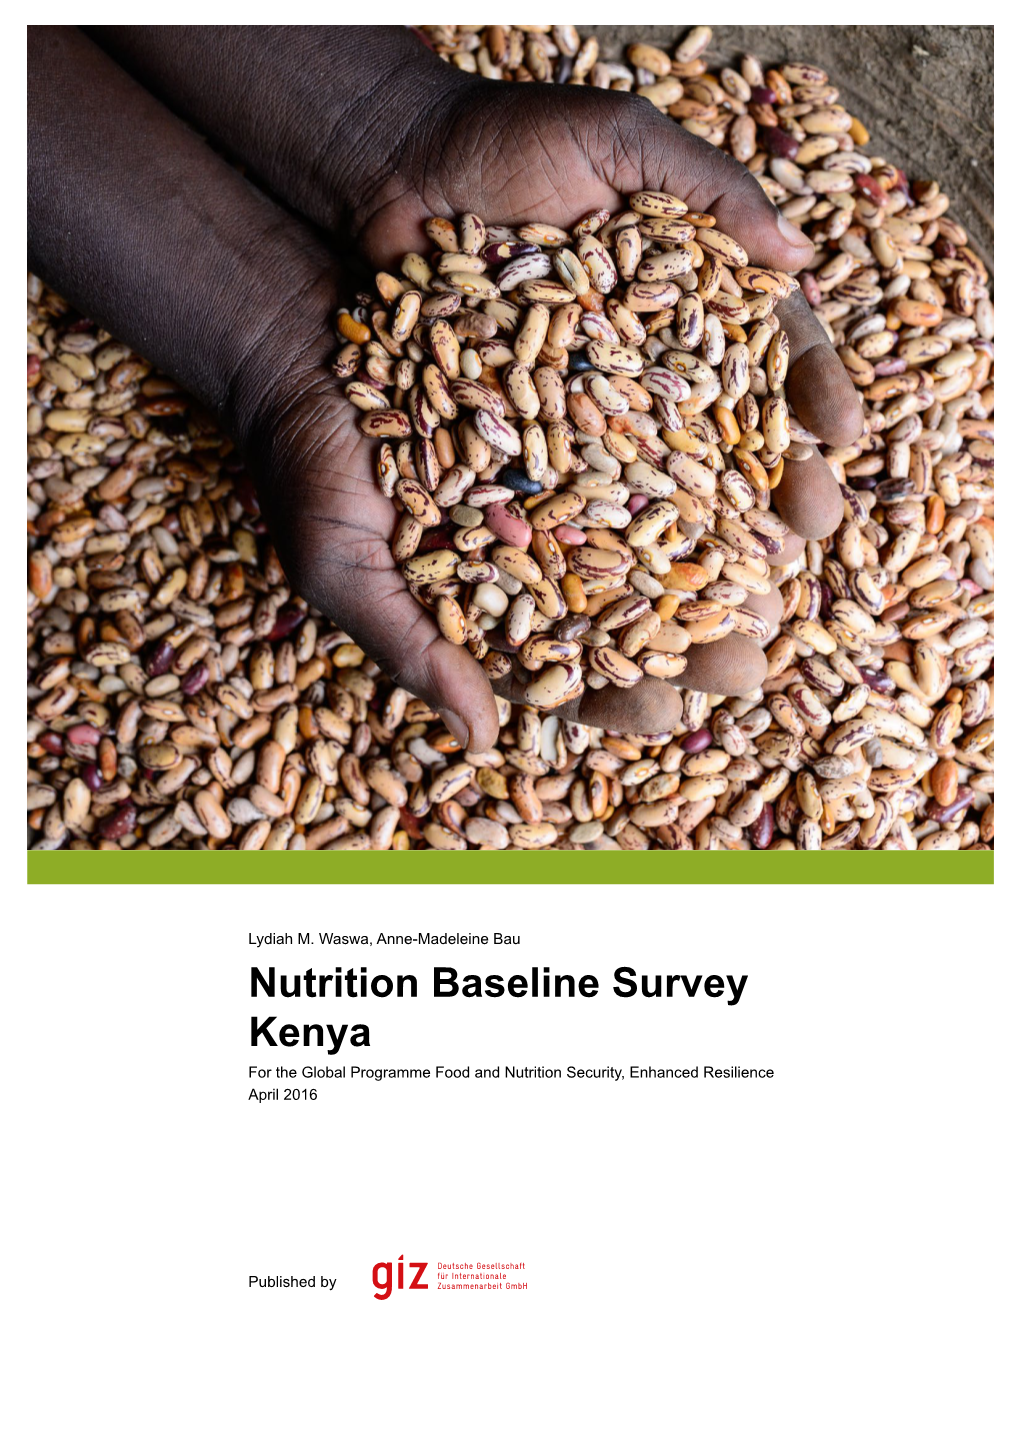 Nutrition Baseline Survey Kenya for the Global Programme Food and Nutrition Security, Enhanced Resilience April 2016